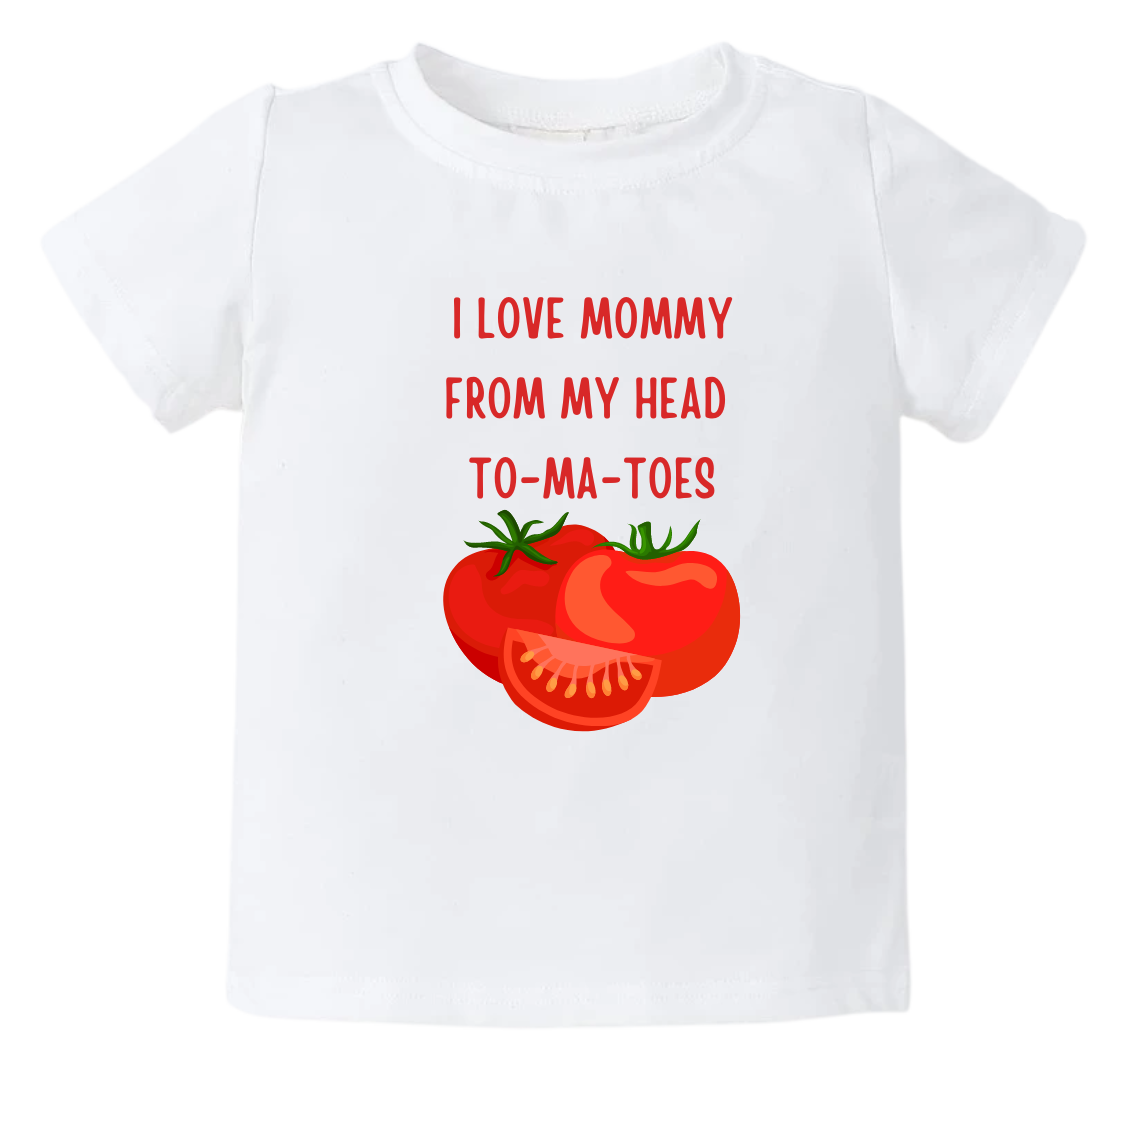 Tomato Baby Onesie® I Love Mommy From My Head To-Ma-Toes Shirt Baby Clothes Unisex Baby Announcement Gift for Mom Newborn Outfit